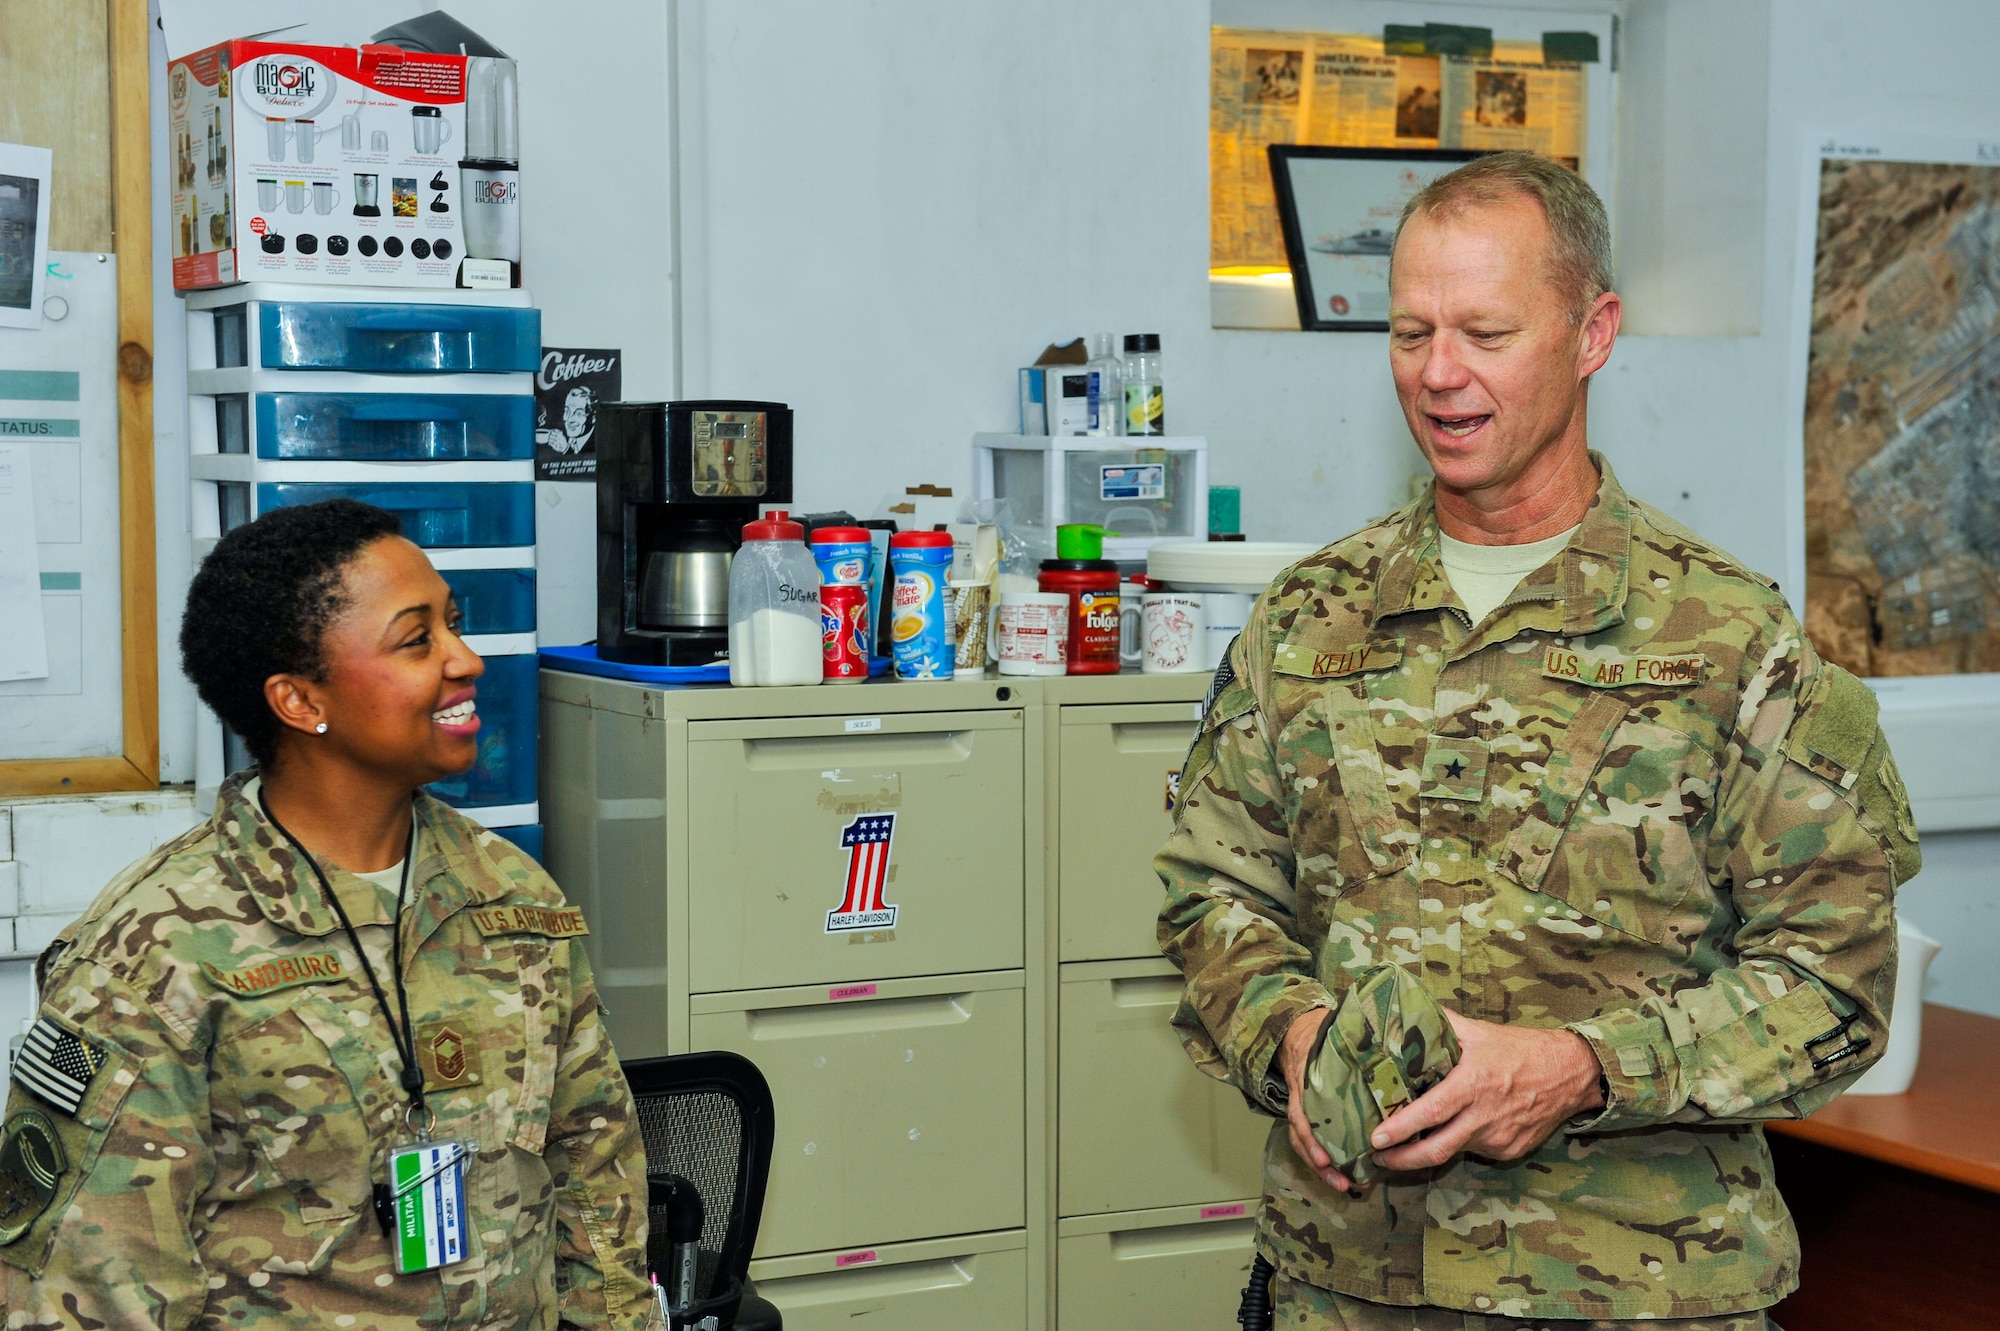 U.S. Air Force Brig. Gen. Mark D. Kelly, 455th Air Expeditionary Wing commander, talks with Senior Master Sgt. Cheronica Blandburg , 451st Air Expeditionary Group Command Post superintendent, during a visit to Kandahar Airfield, Afghanistan, May 3, 2015.  The general along with Chief Master Sgt. Jeffery Brown, 455th AEW command chief, met with Airmen from across the group who provide intelligence, surveillance and reconnaissance, command and control, personnel recovery, and airborne datalink capabilities to commanders in the Afghanistan theater of operations. (U.S. Air Force photo by Maj. Tony Wickman/Released)   